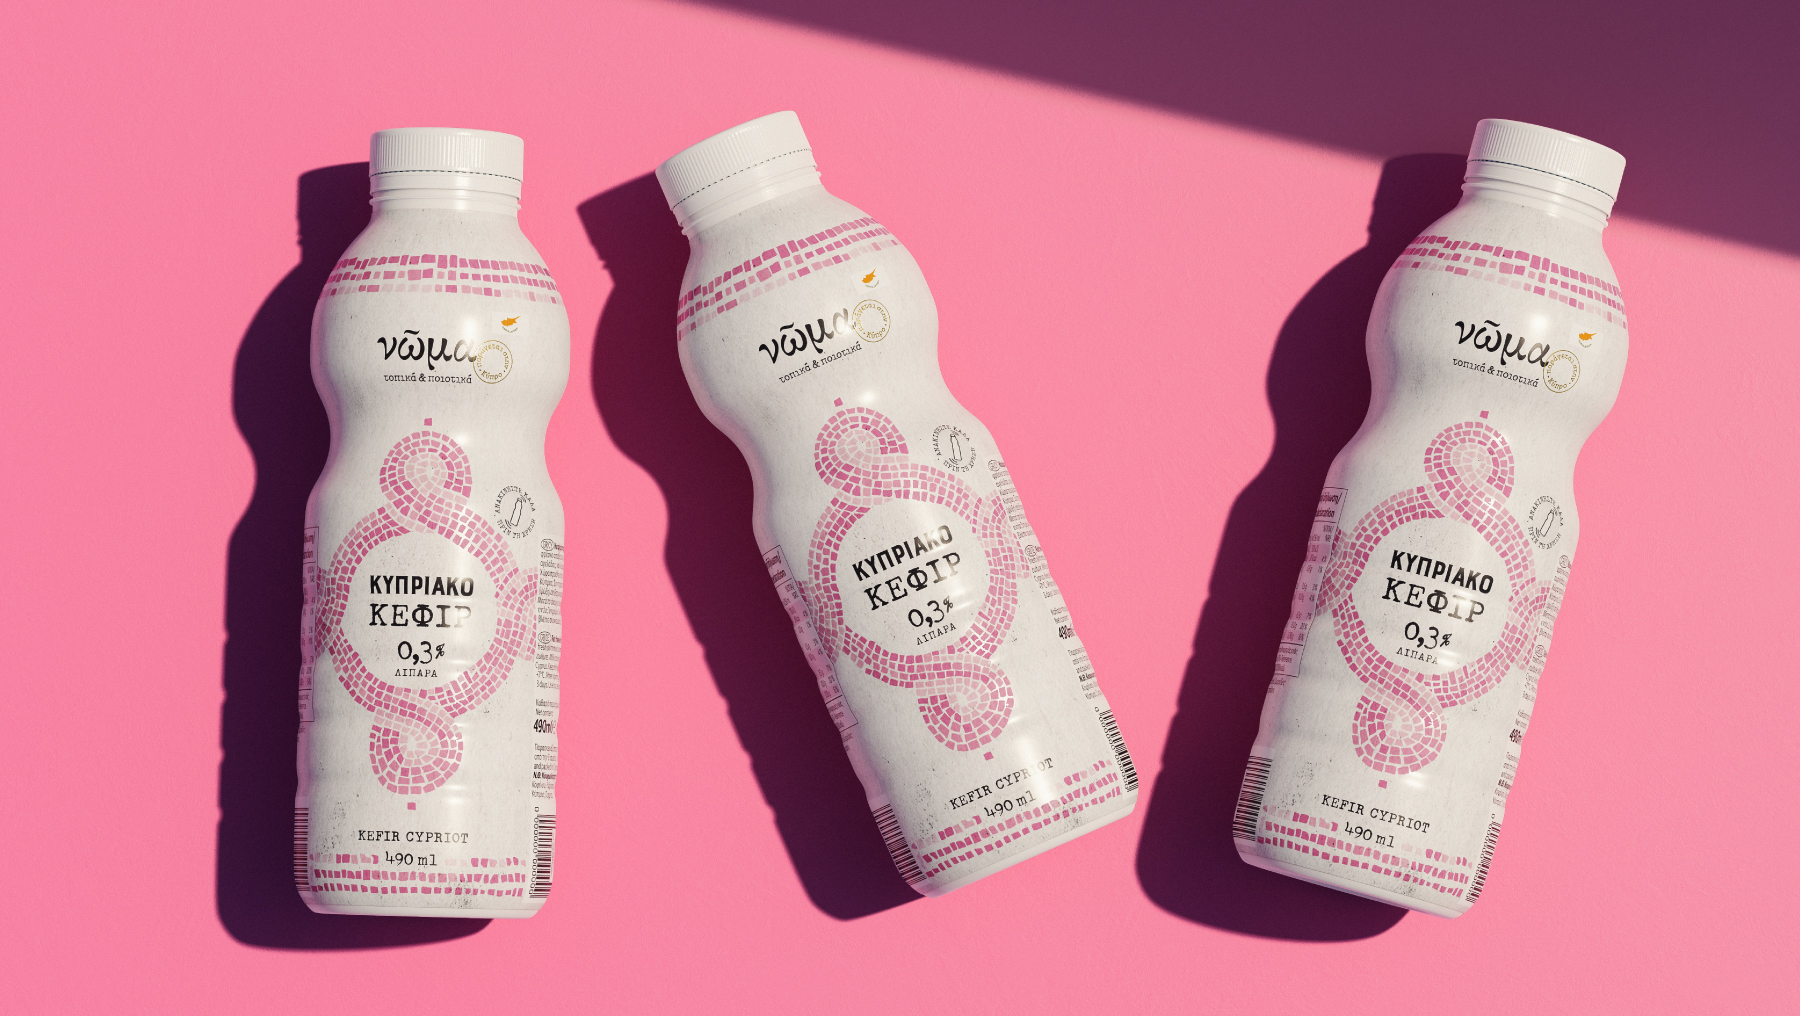 Lidl's Noma Kefir: A Modern Take on a Traditional Dairy Product with a Unique Packaging Design